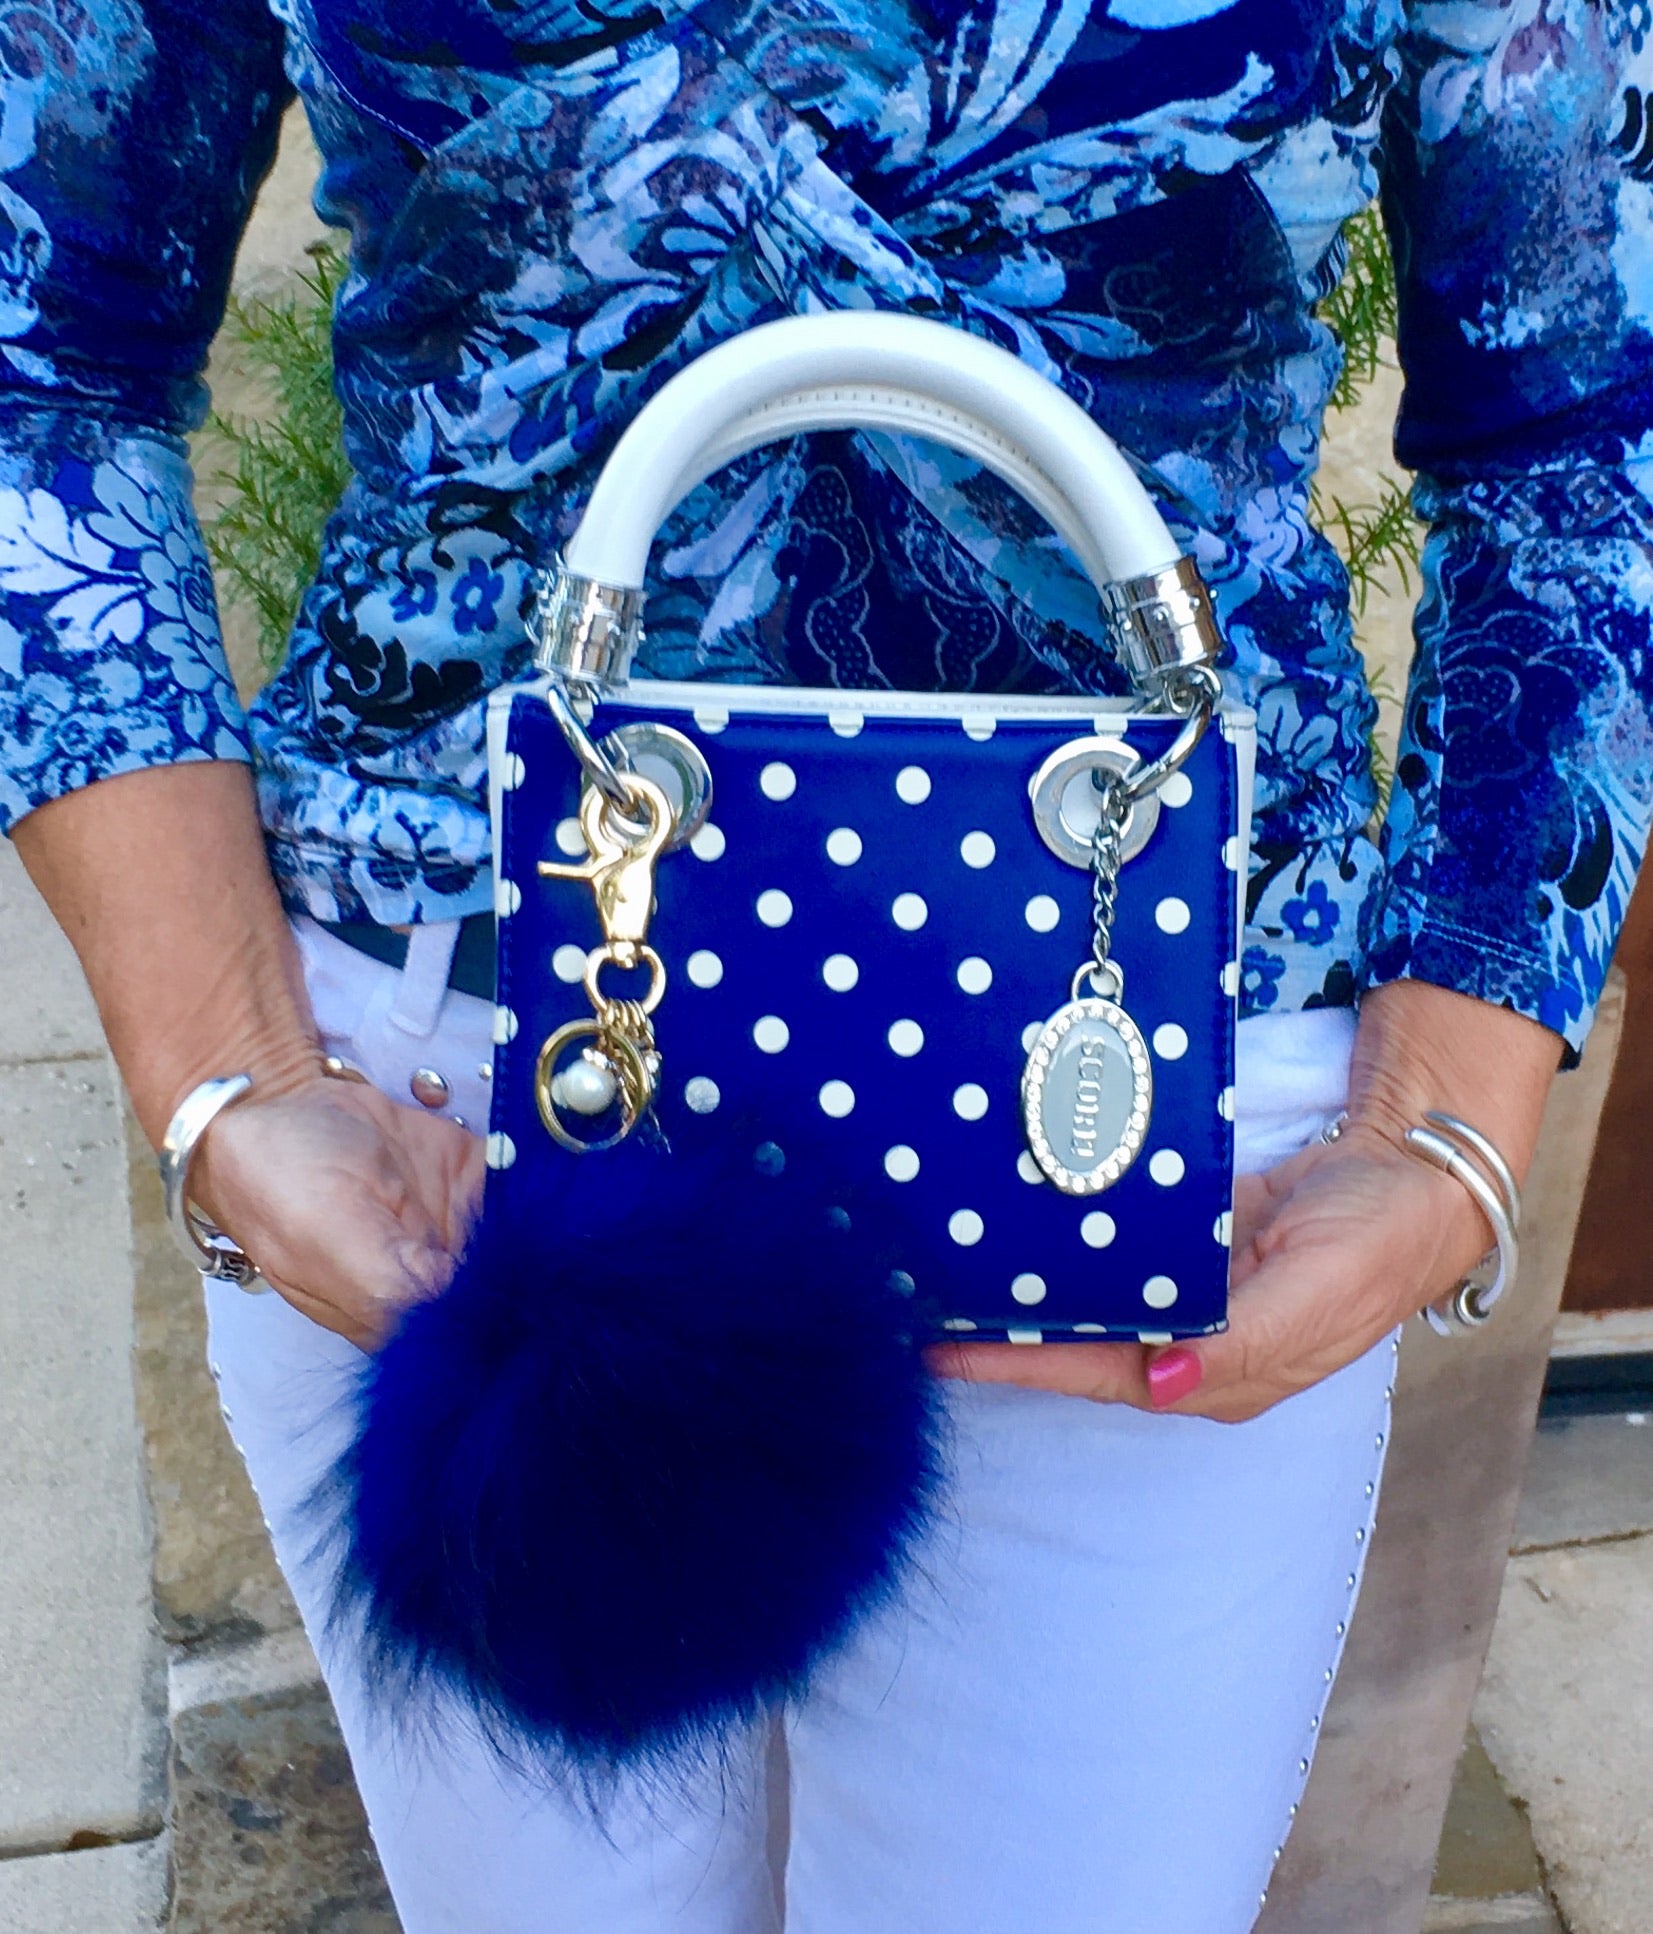 Real Fur Puff Ball Pom-Pom 6 Accessory Dangle Purse Charm - Royal Blue  with Gold Hardware